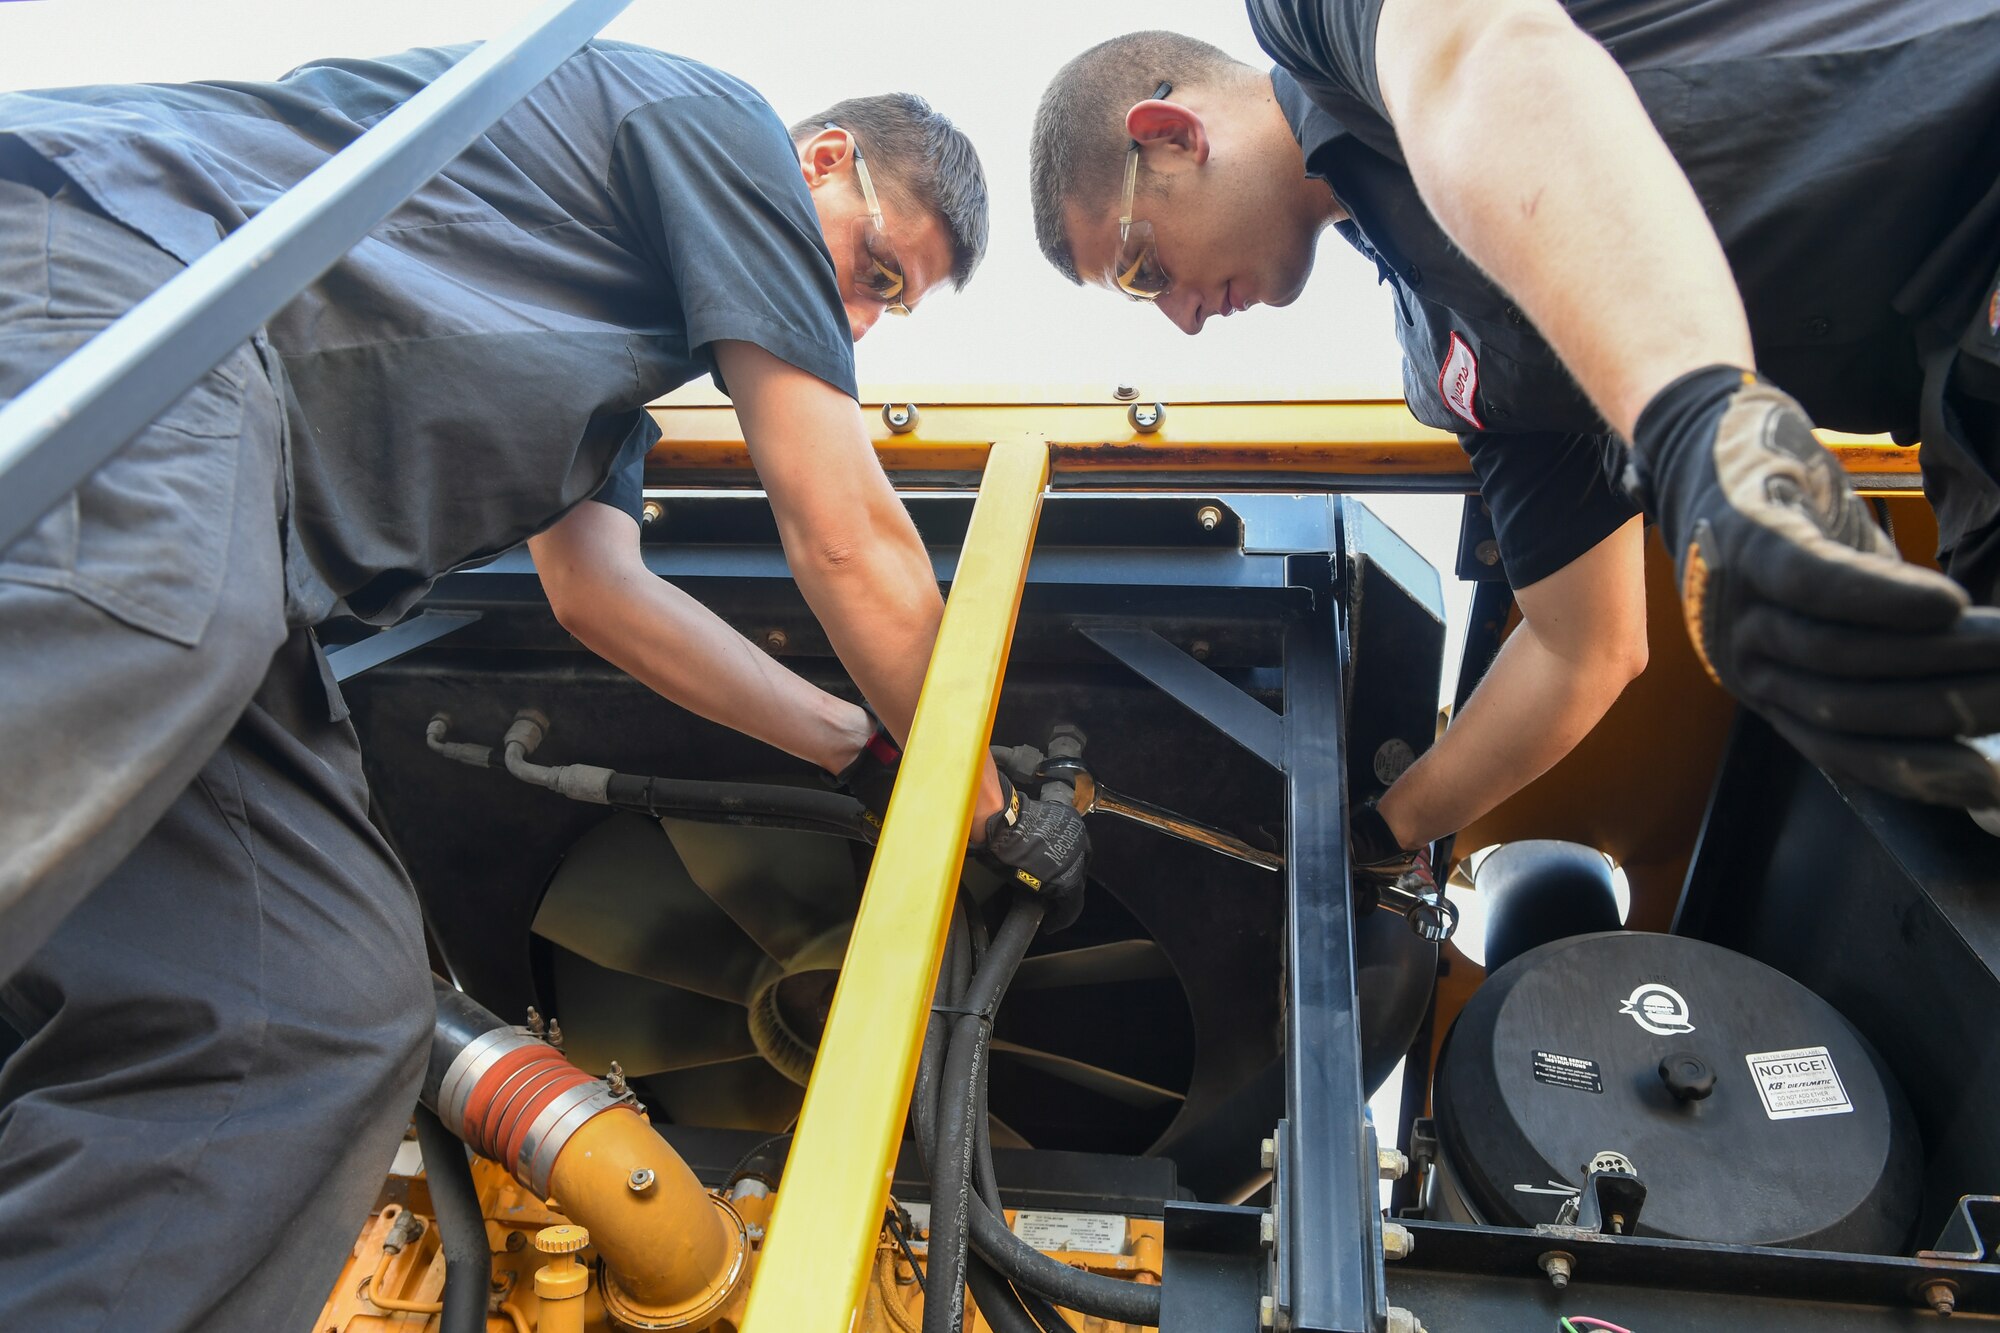 (Left to right) Airman Sean Horwath and Airman 1st Class Jason Owens, 75th Logistics Readiness Squadron, perform maintenance on an OshKosh snow broom at Hill Air Force Base, Utah, Aug. 1, 2019. The squadron is overhauling the base's snow fleet after a snowy winter to be ready for the next winter season. (U.S. Air Force photo by Cynthia Griggs)